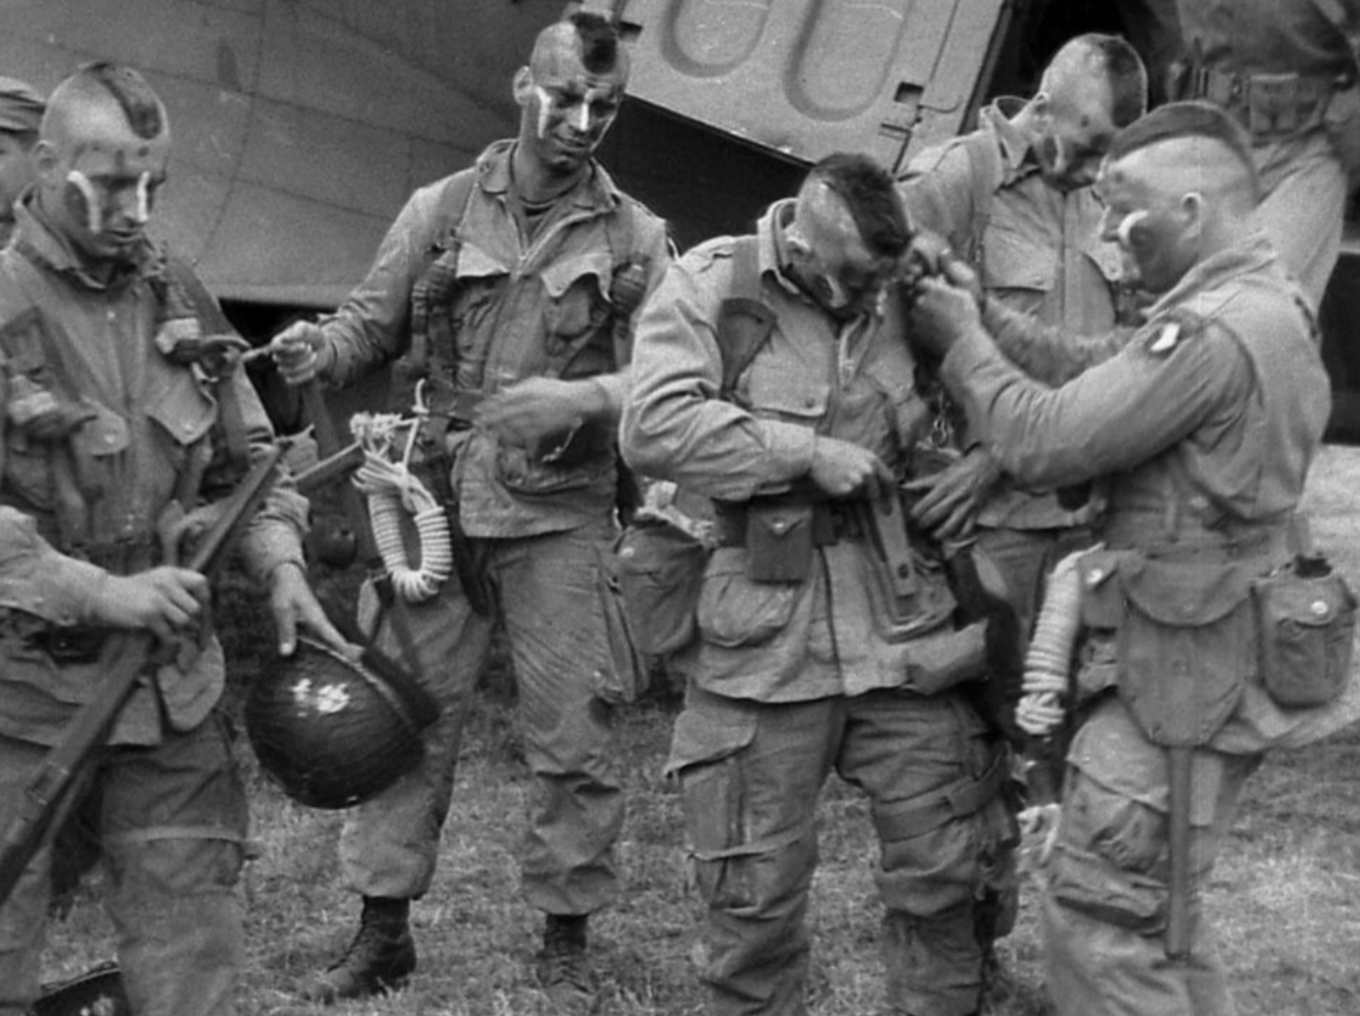 The 101st Airborne Division’s “Filthy Thirteen” volunteer pathfinders preparing to parachute into France just after midnight on June 6, 1944. They were among the first allied troops to set foot on French soil on D-Day. Their mission was to mark drop zones for the airborne assault.